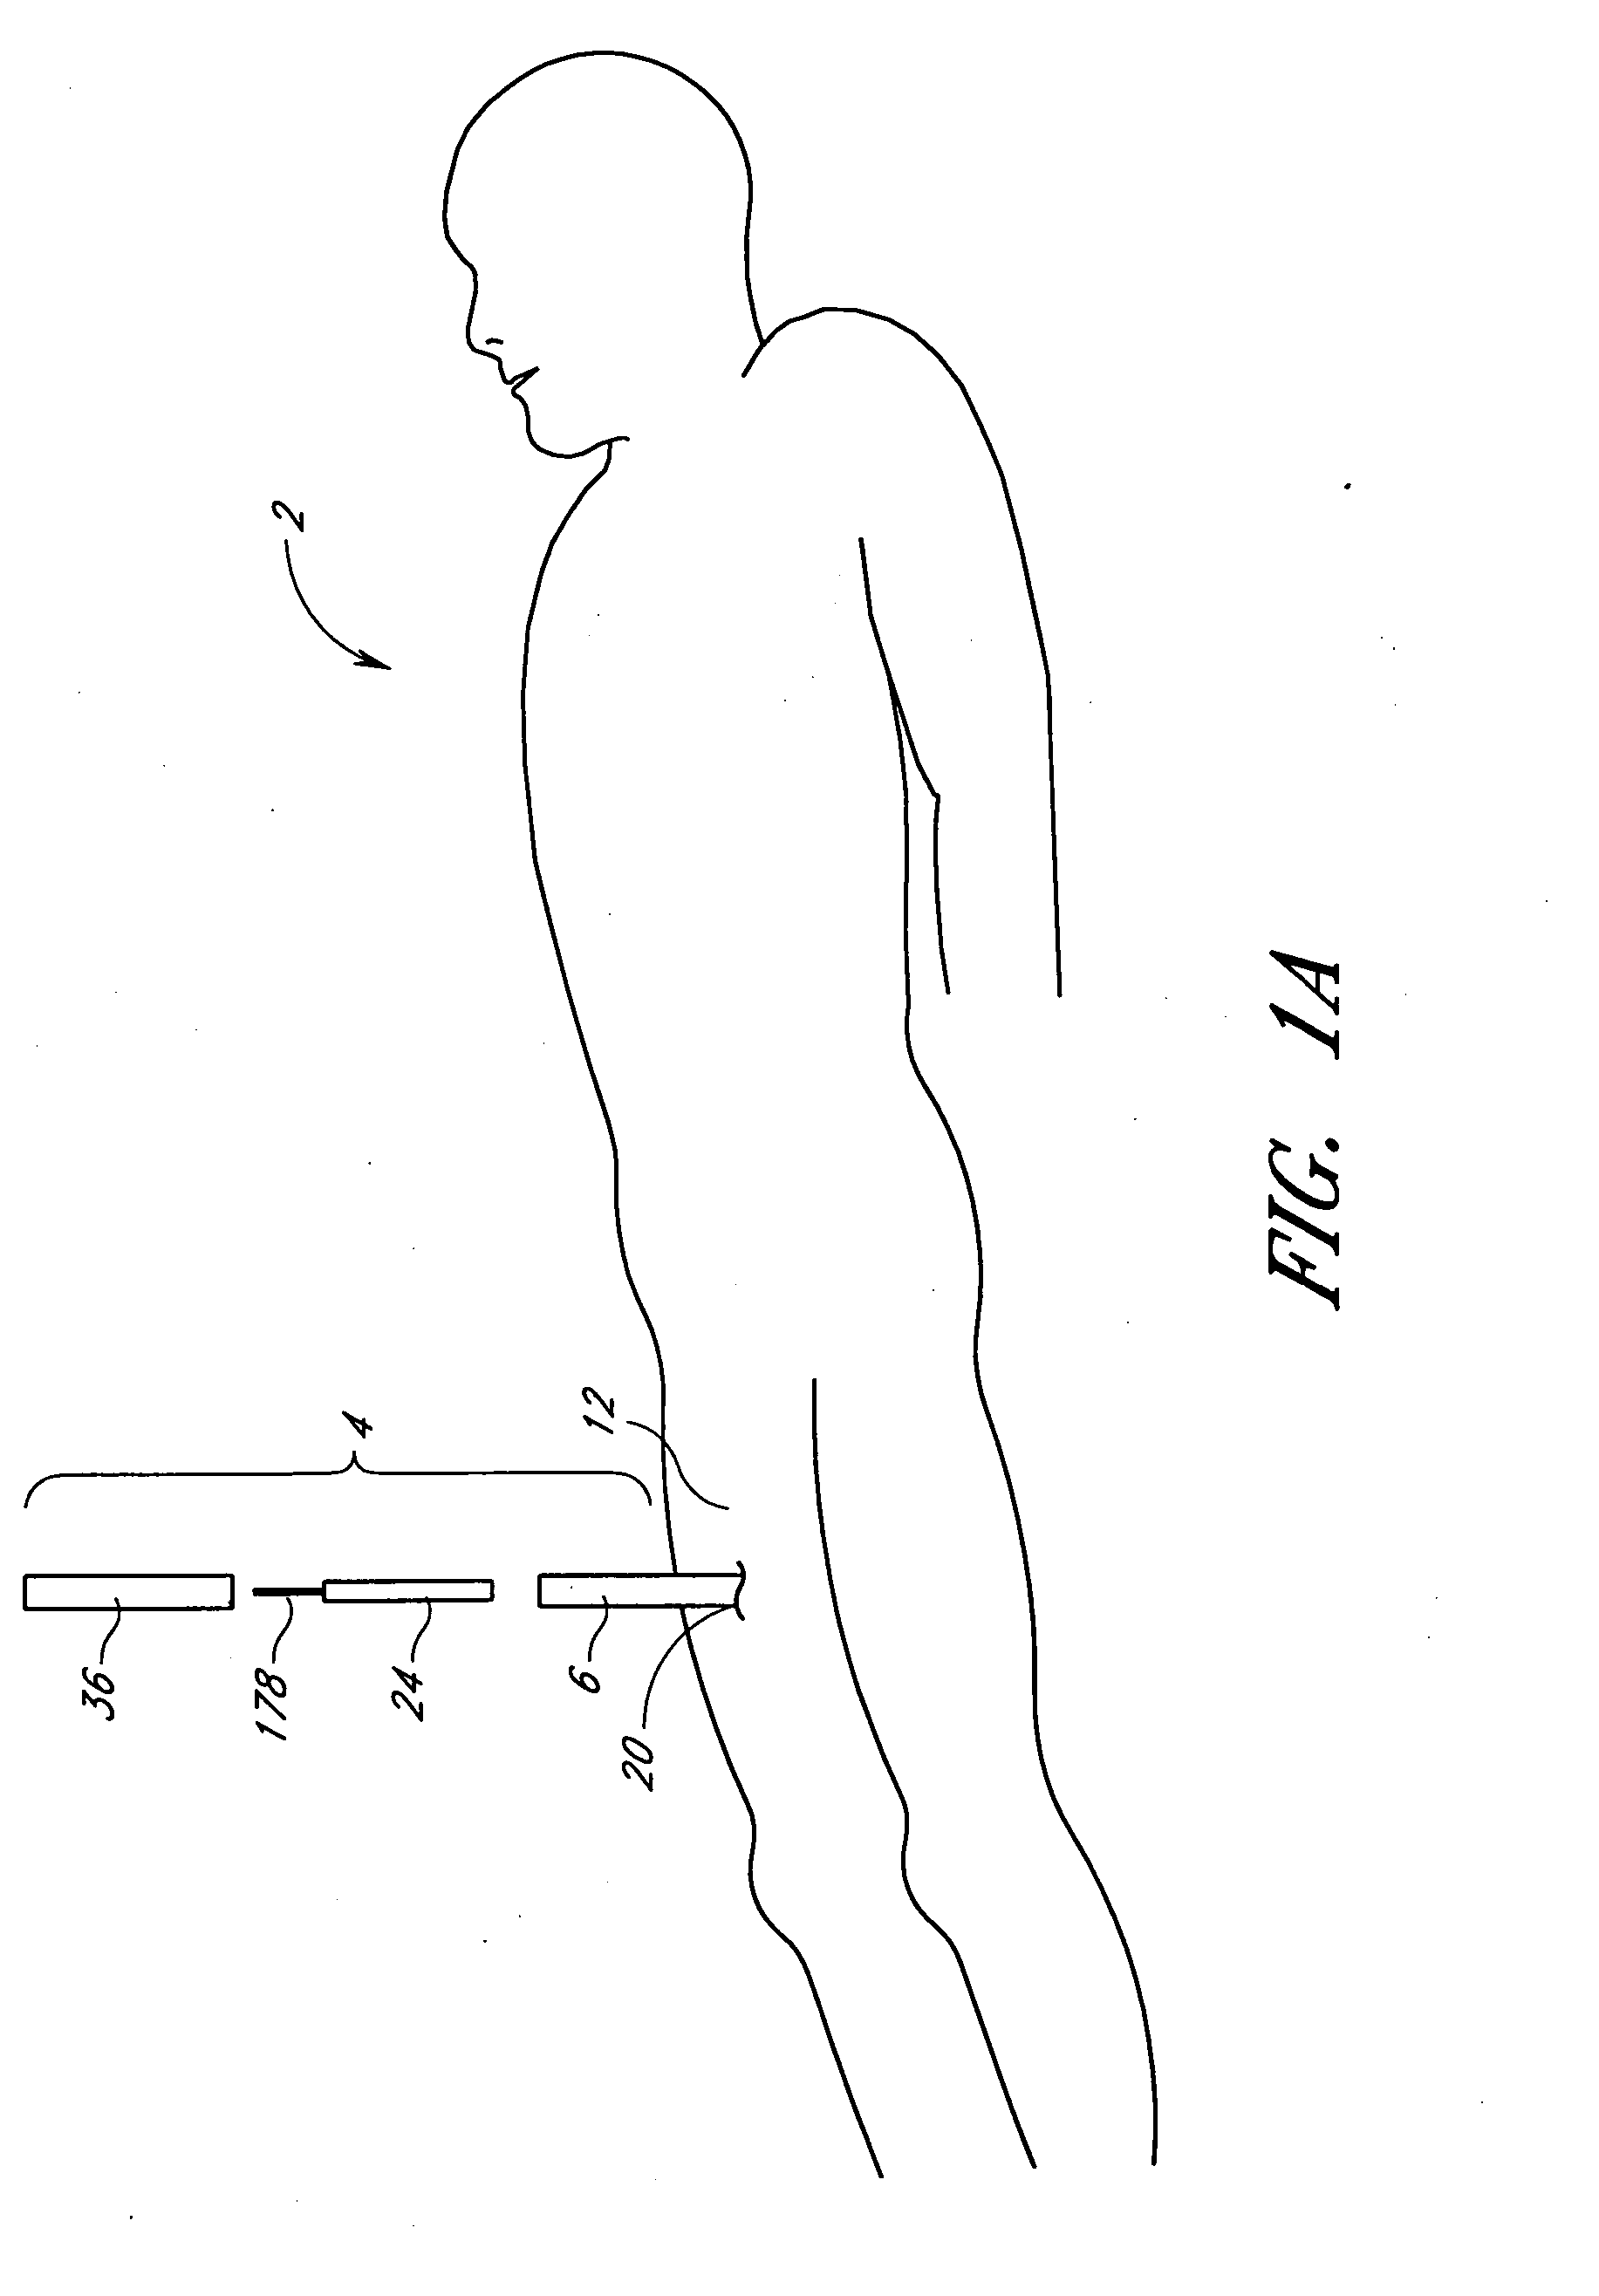 Suturing device and method